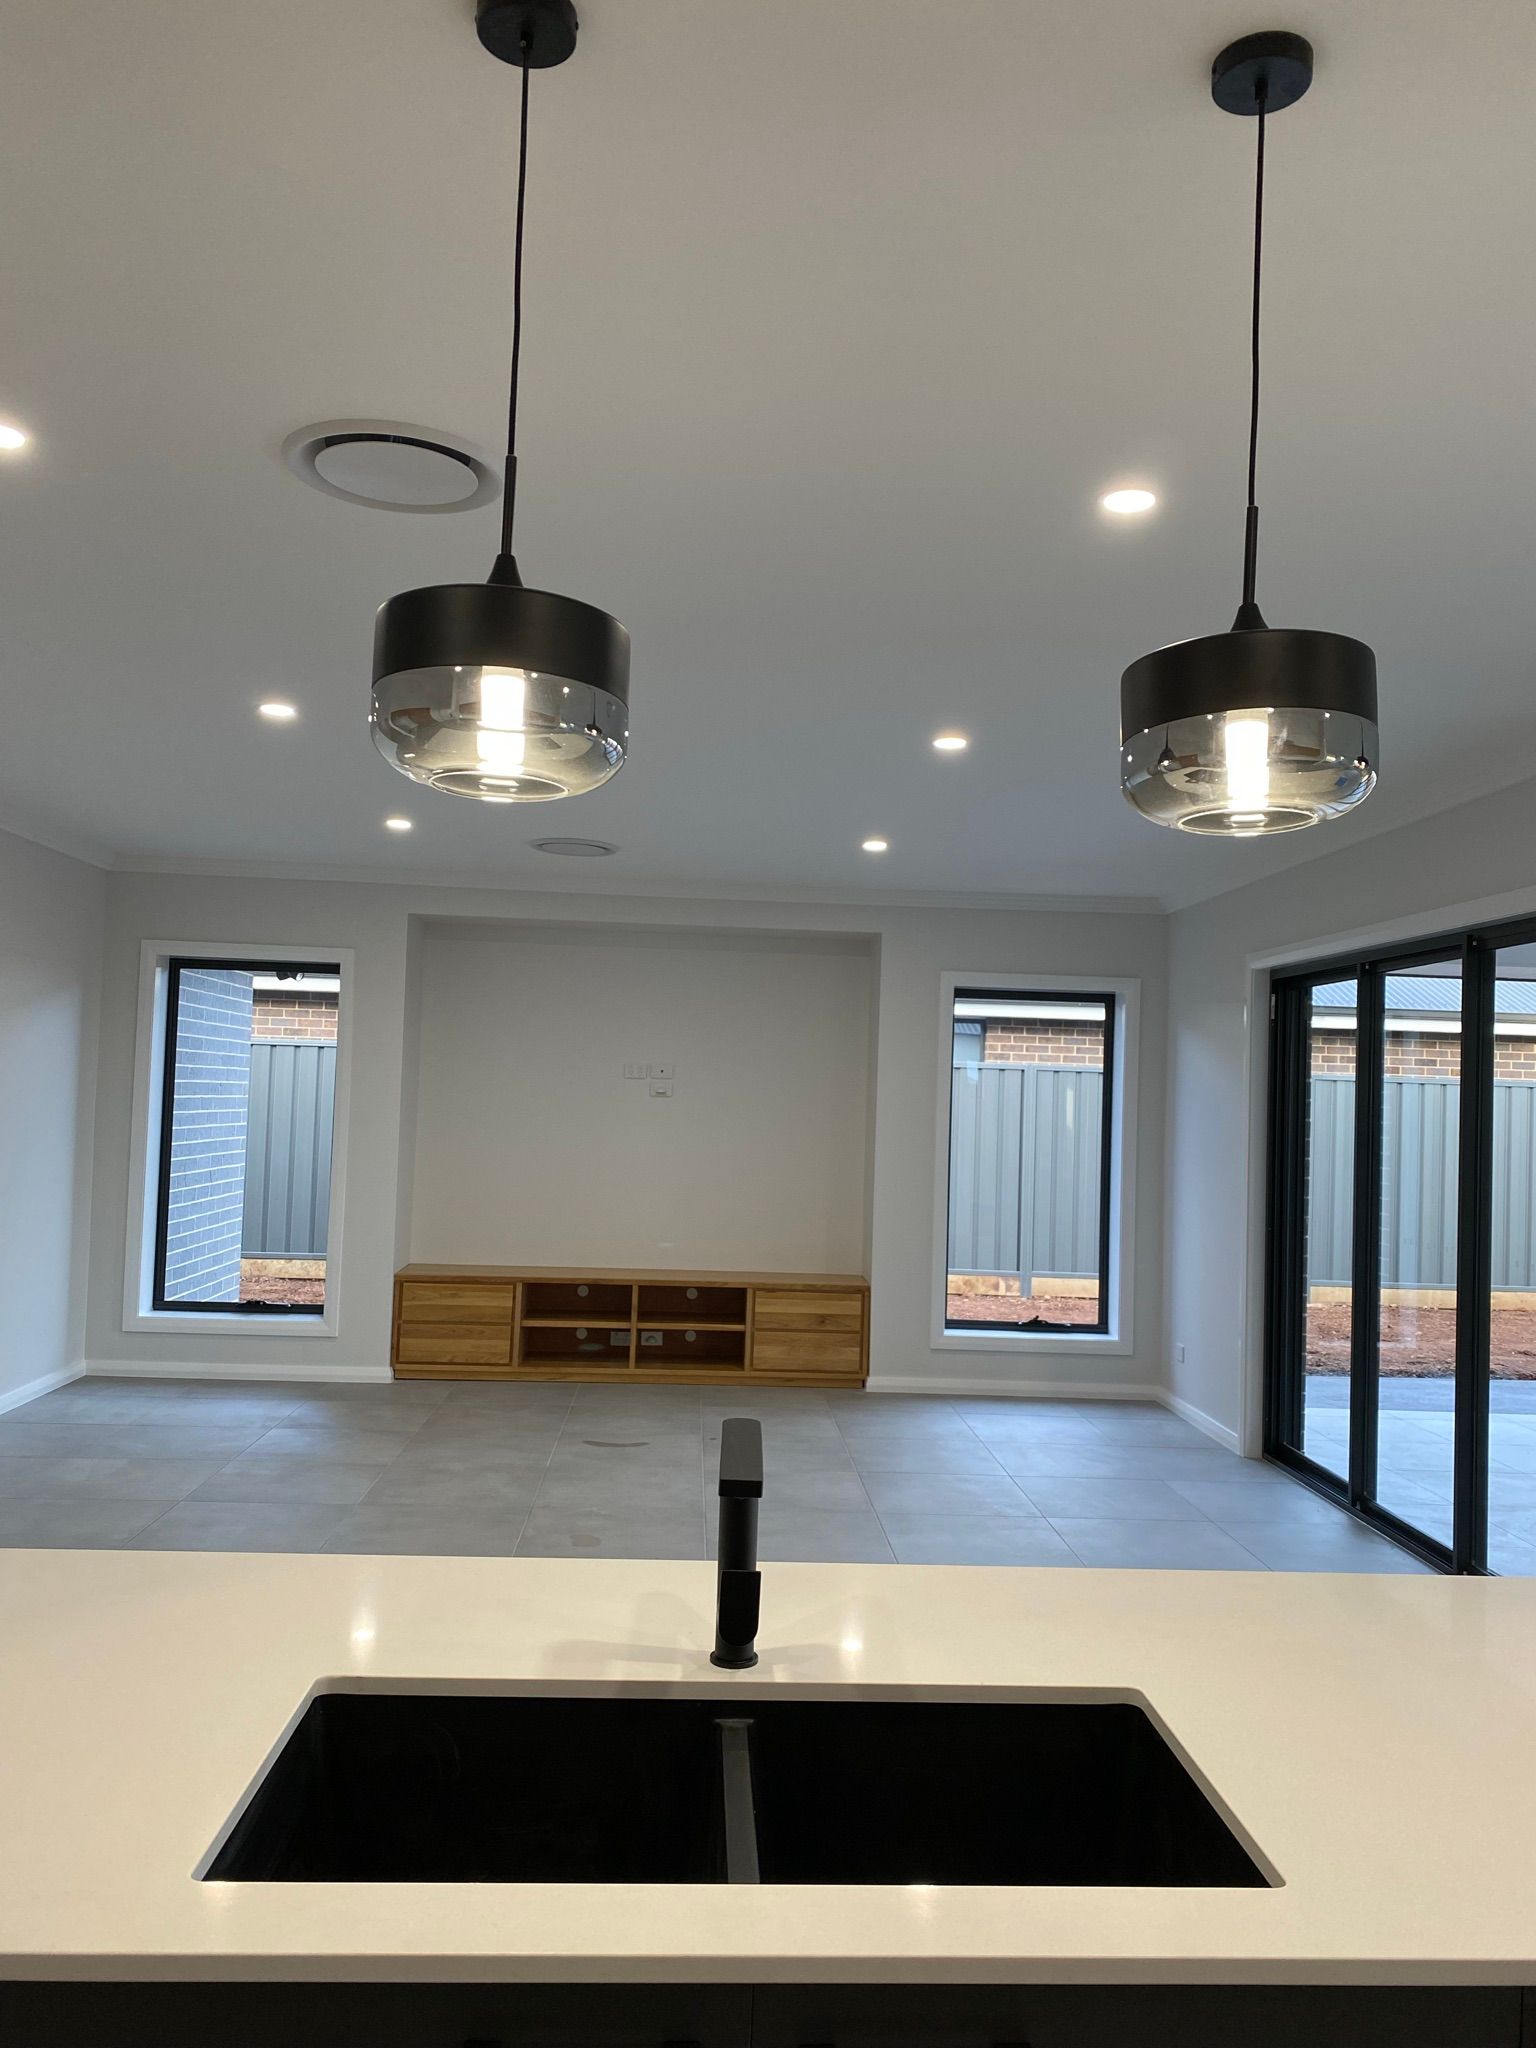 New Build House With Two Beautiful Pendant Lights — Kitchen Renovations in Dubbo, QLD